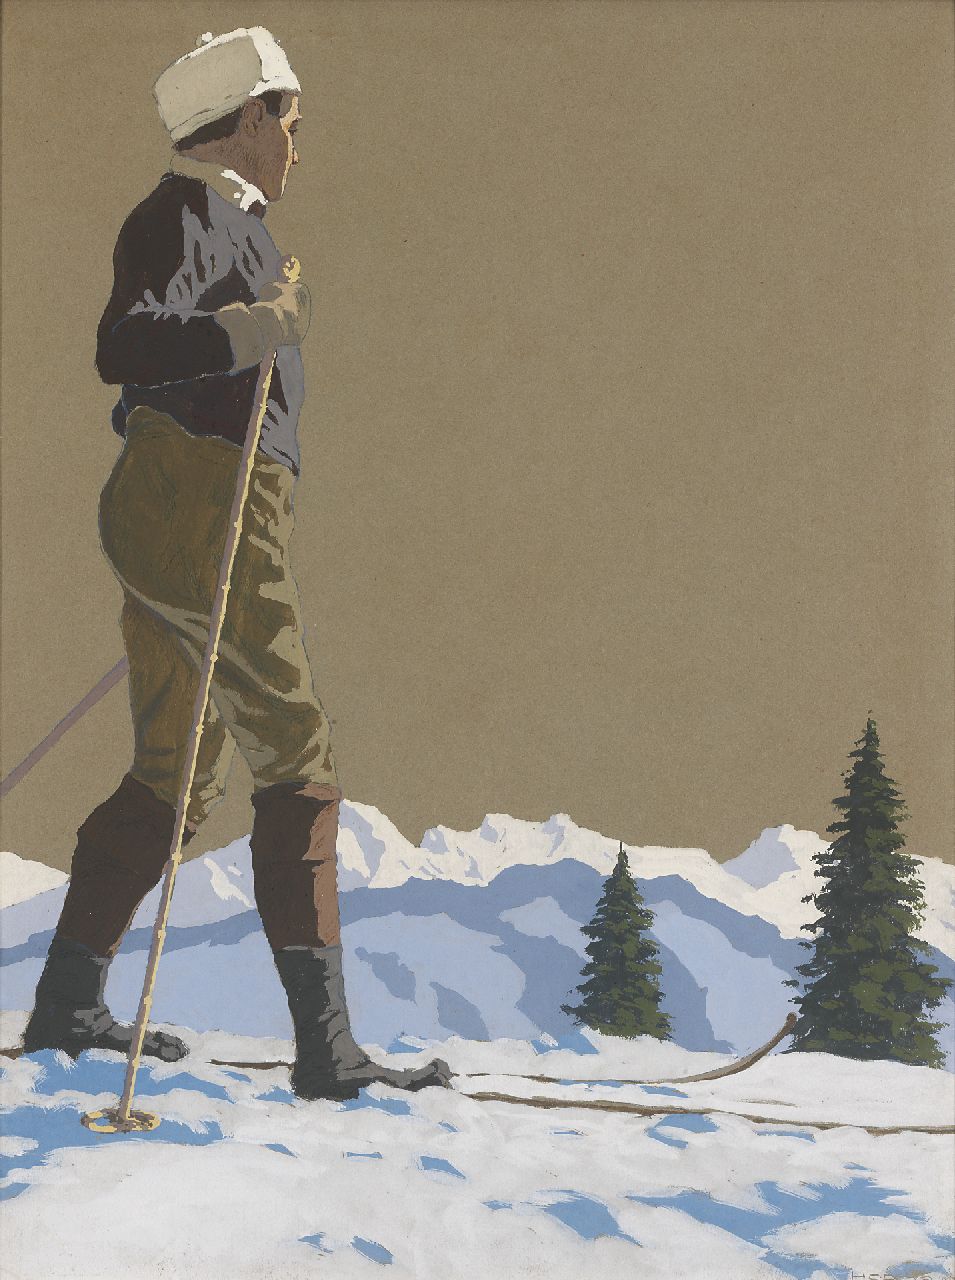 Hodiener/Hodina H.  | Hugo Hodiener/Hodina, Pioneer on skis, gouache on paper 57.0 x 43.2 cm, signed l.r. and dated 1913